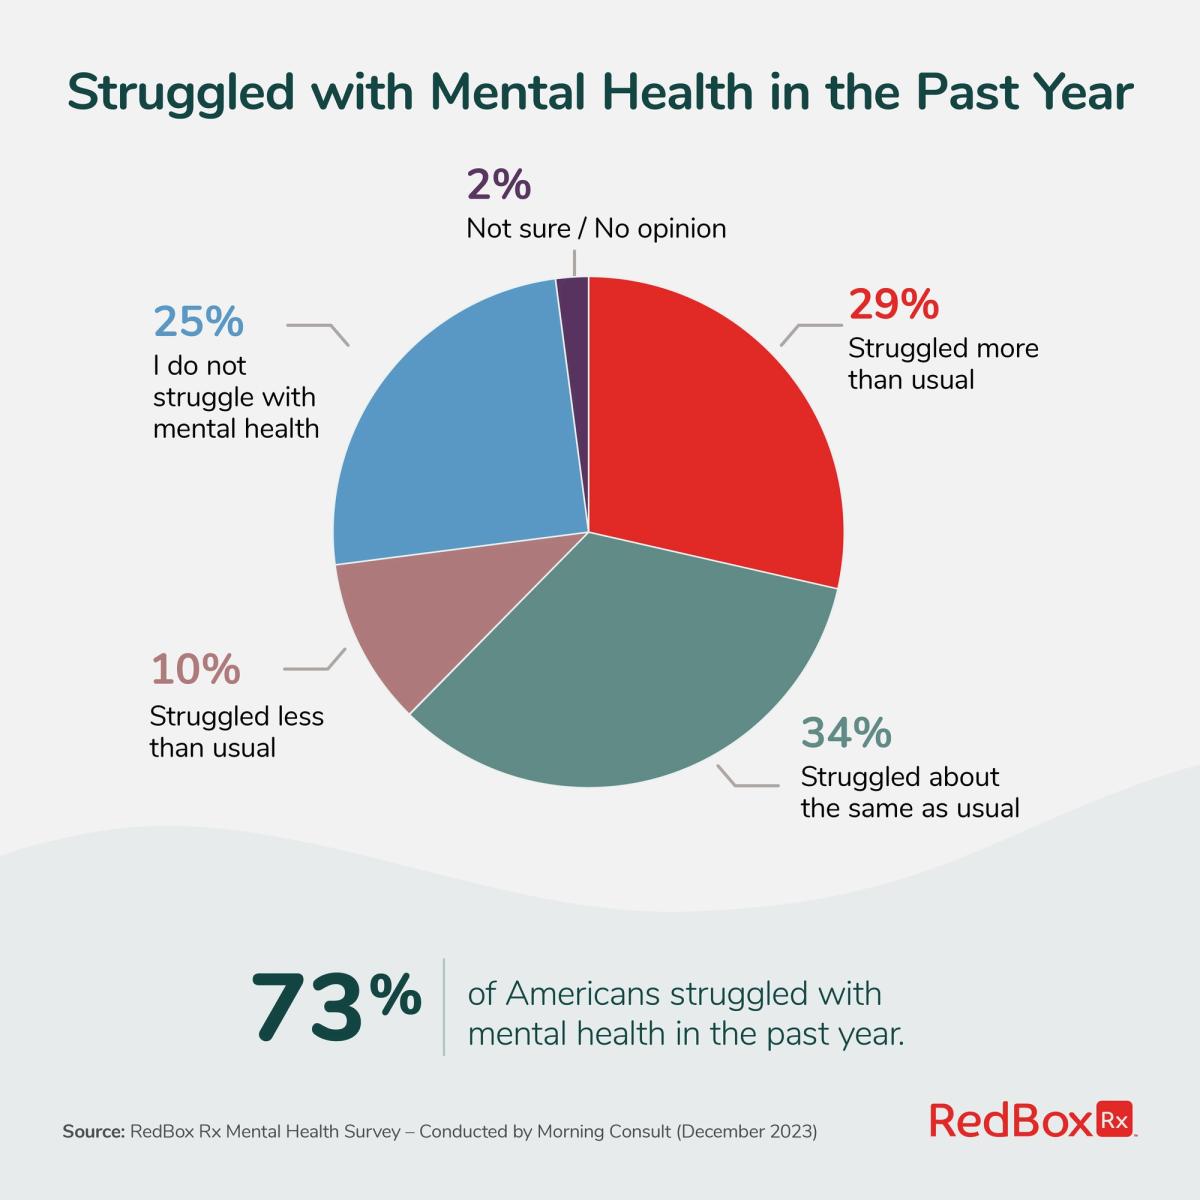 73% of Americans Struggled with Mental Health in the Past Year